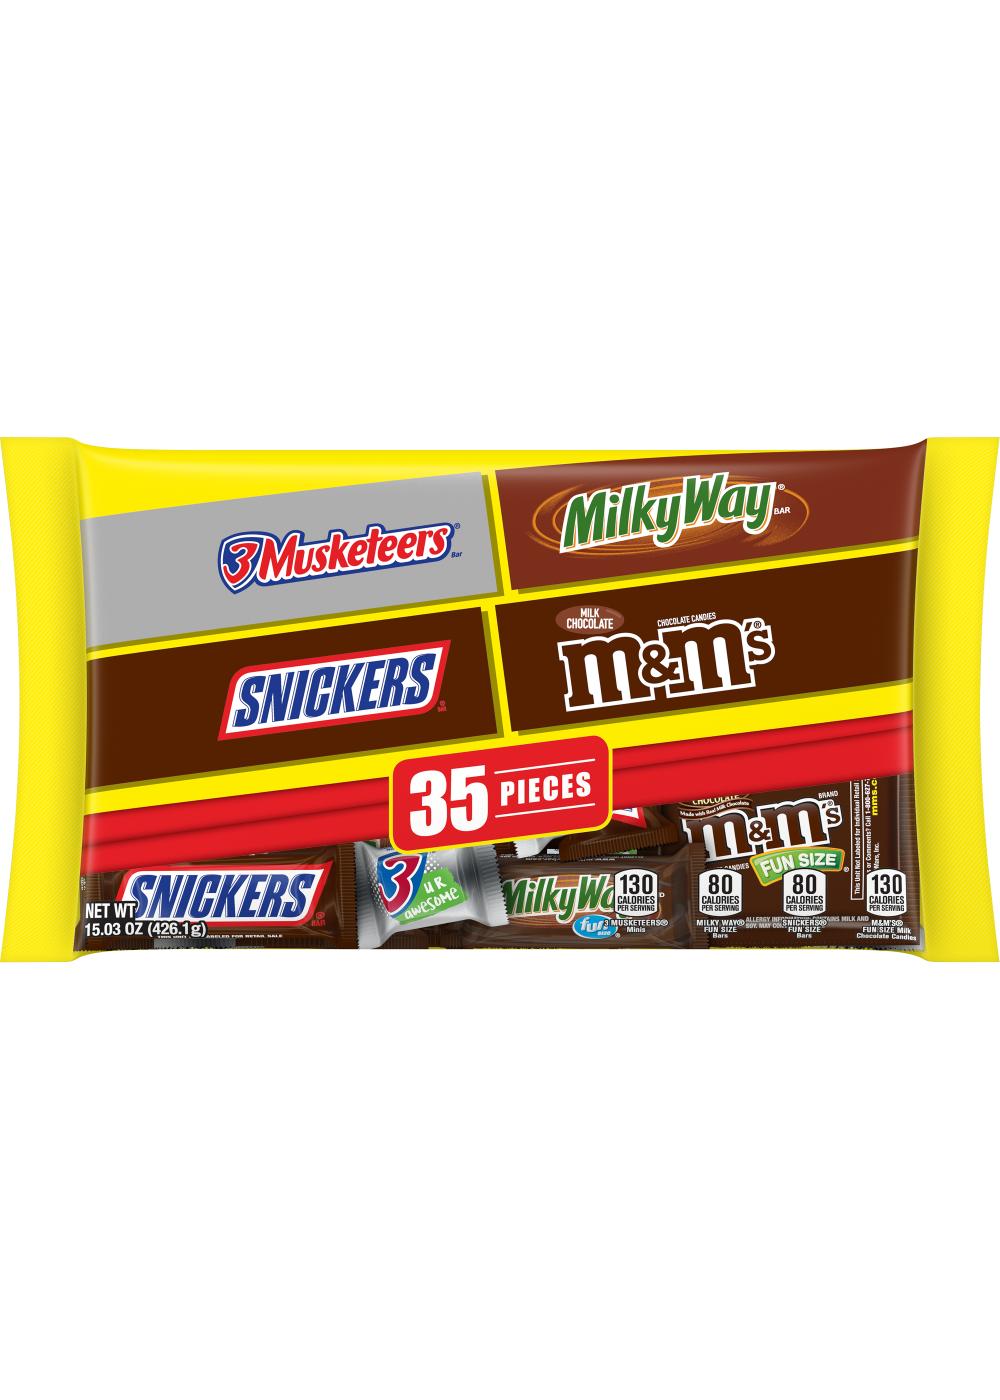 SNICKERS Minis Size Chocolate Bar Variety Mix Candy Bag, 16 oz, Chocolate